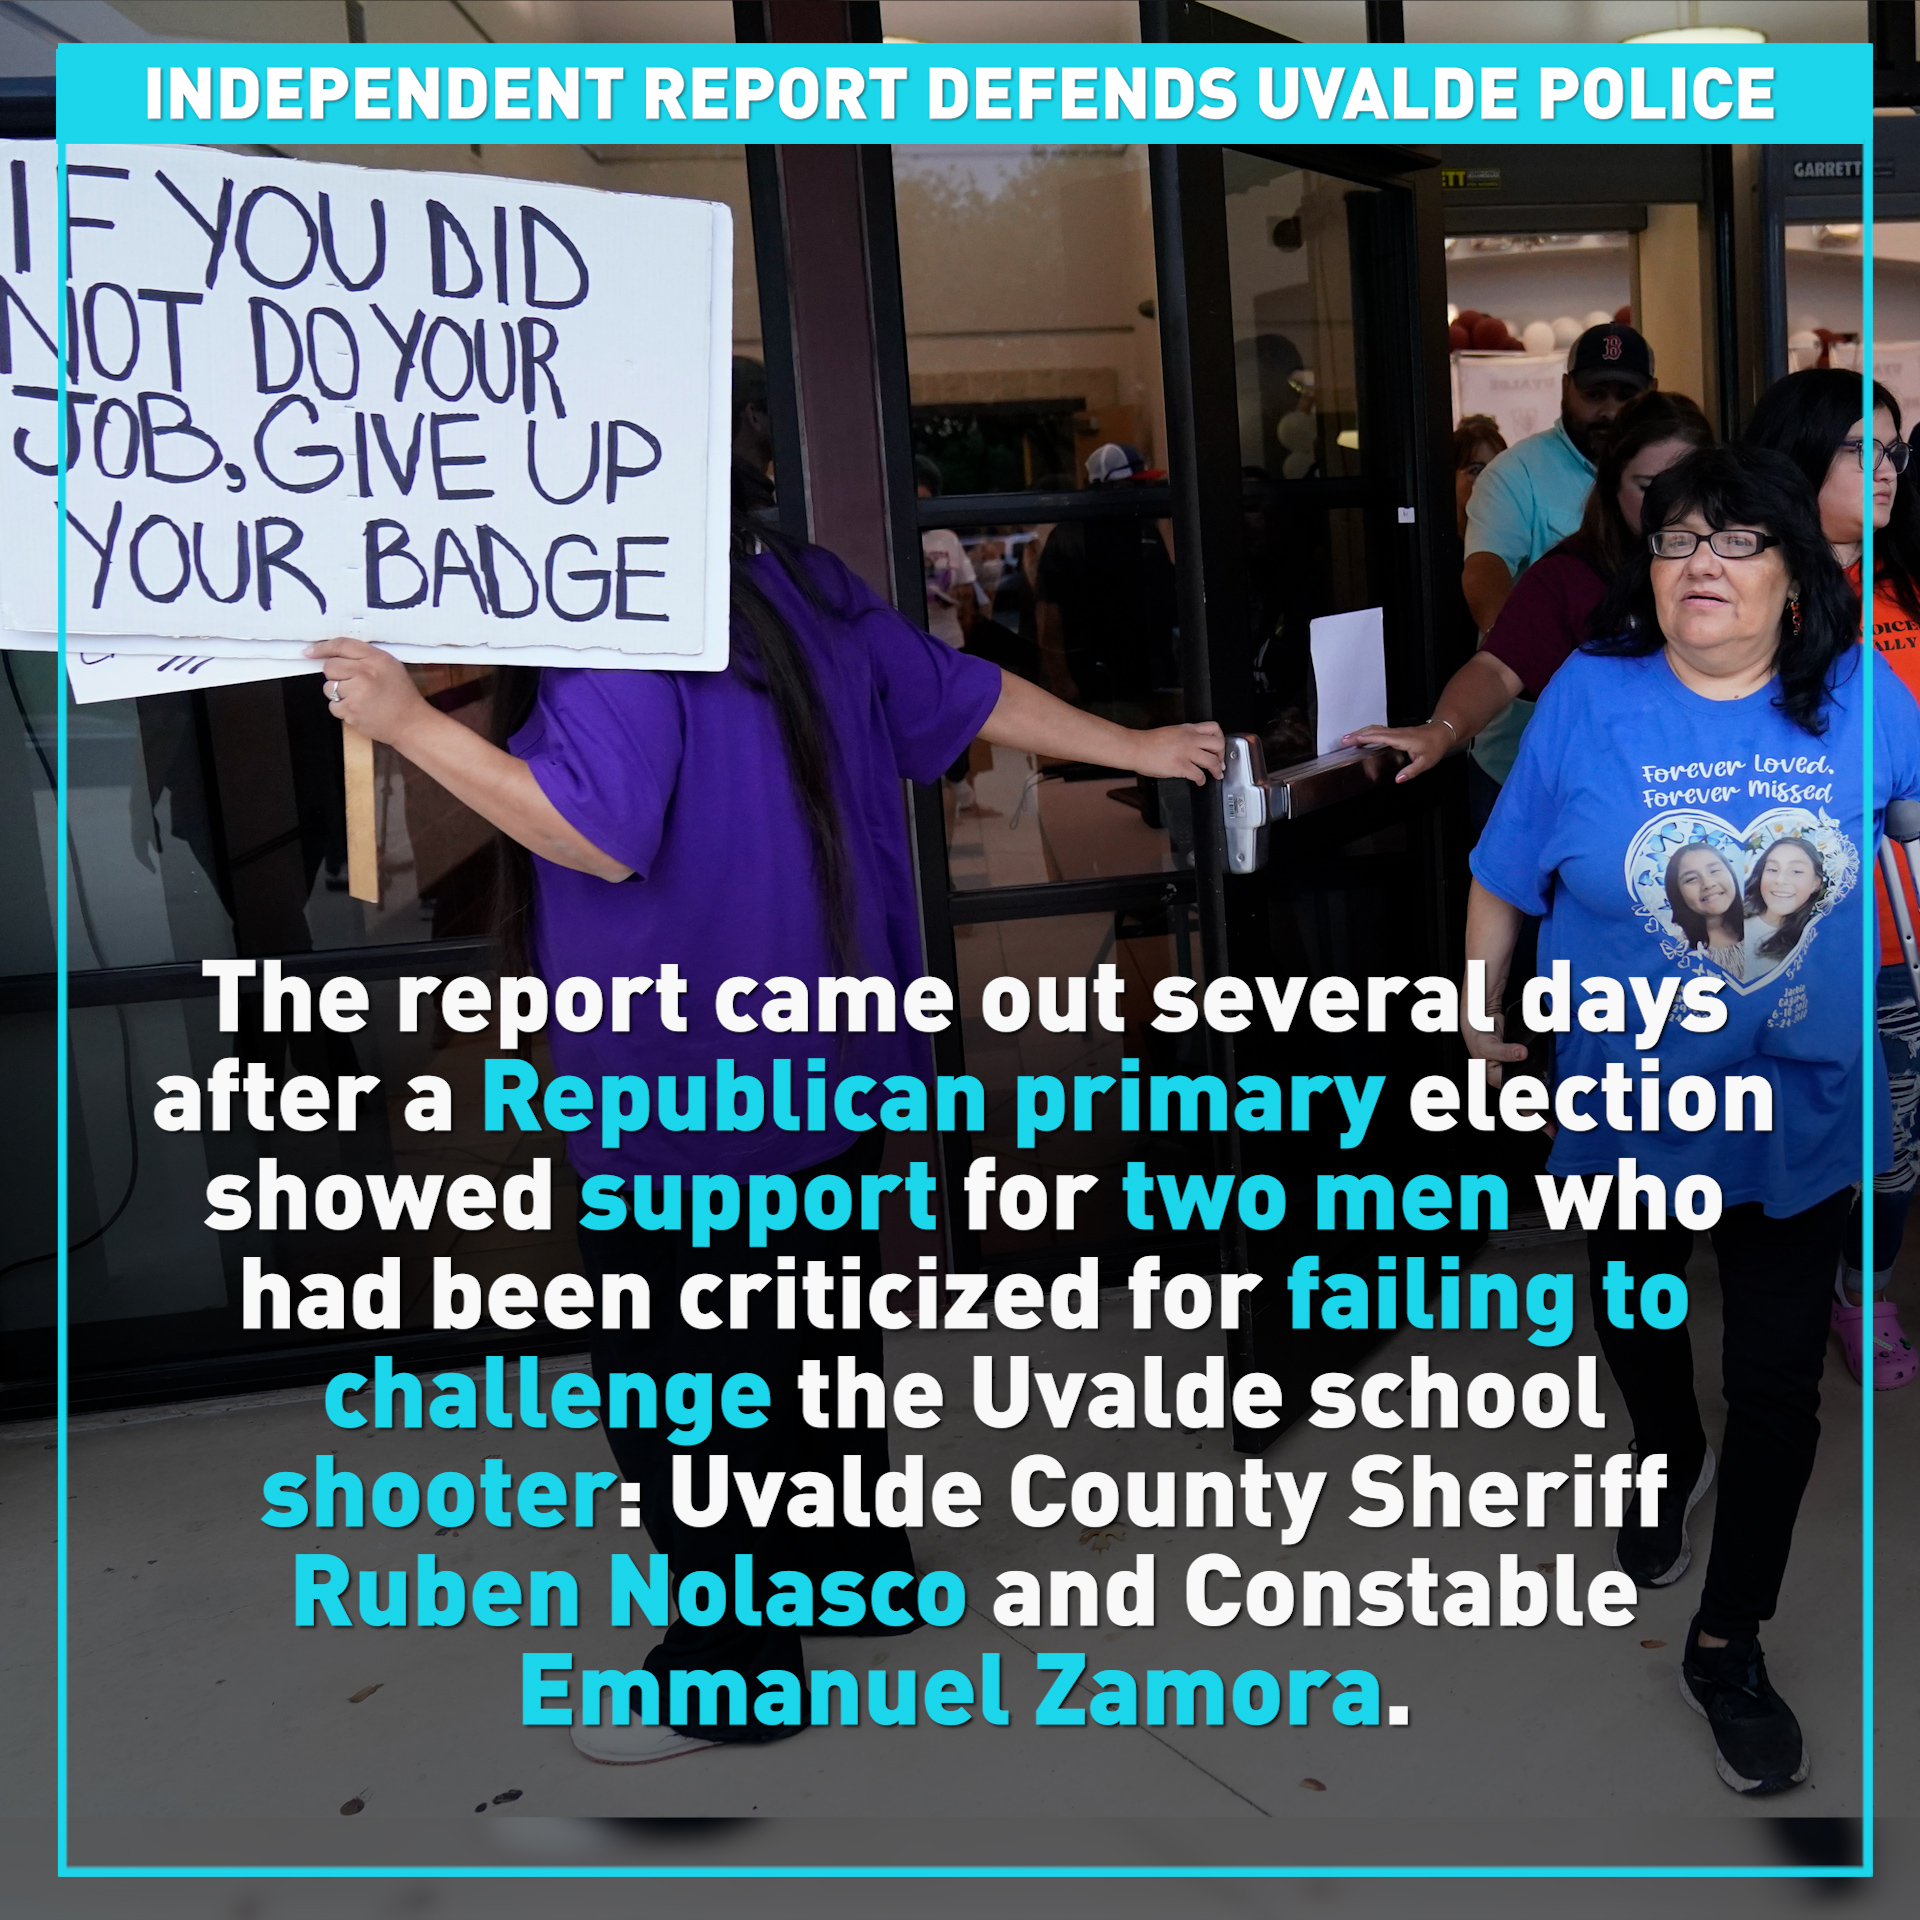 Independent report defends Uvalde police 2022 mass shooting response 